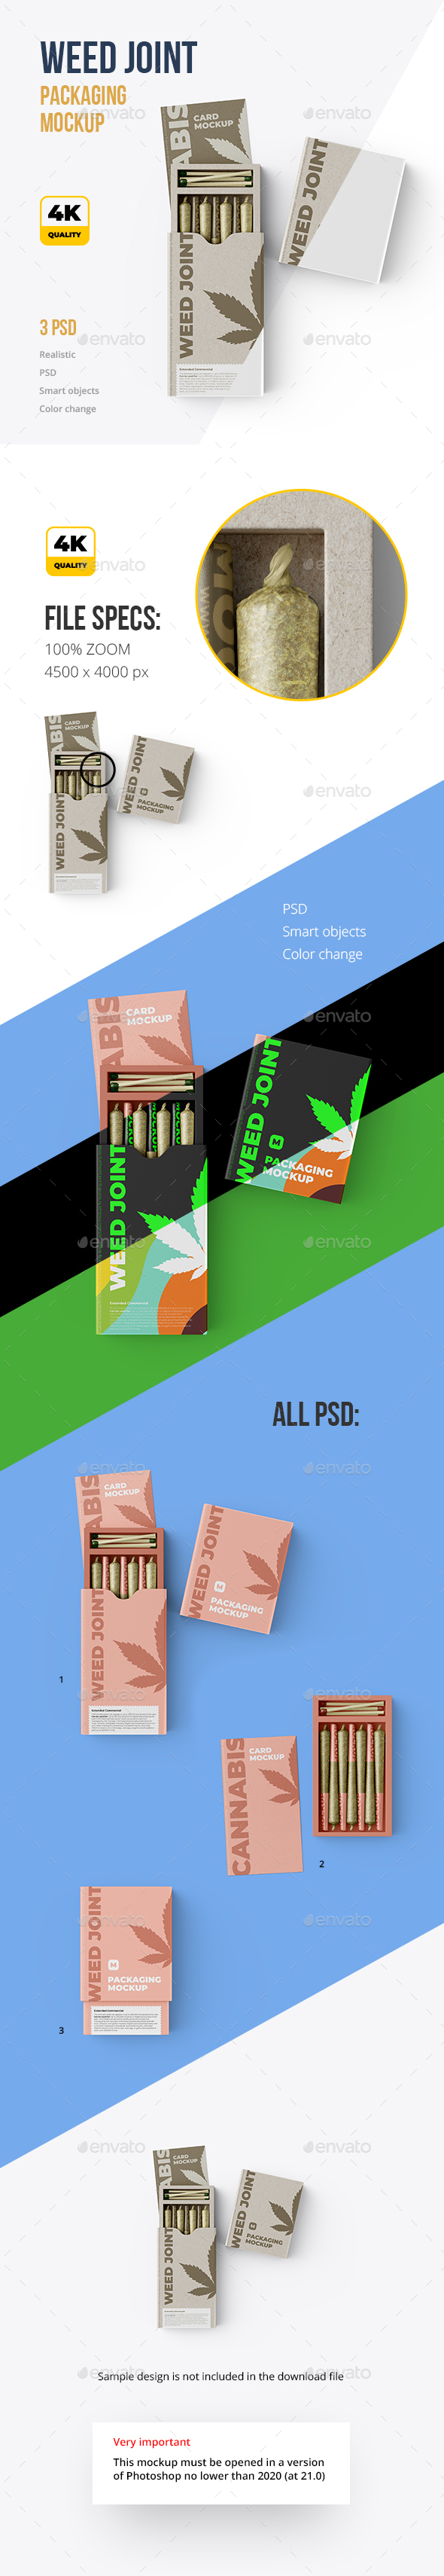 Download Weed Product Mockups From Graphicriver